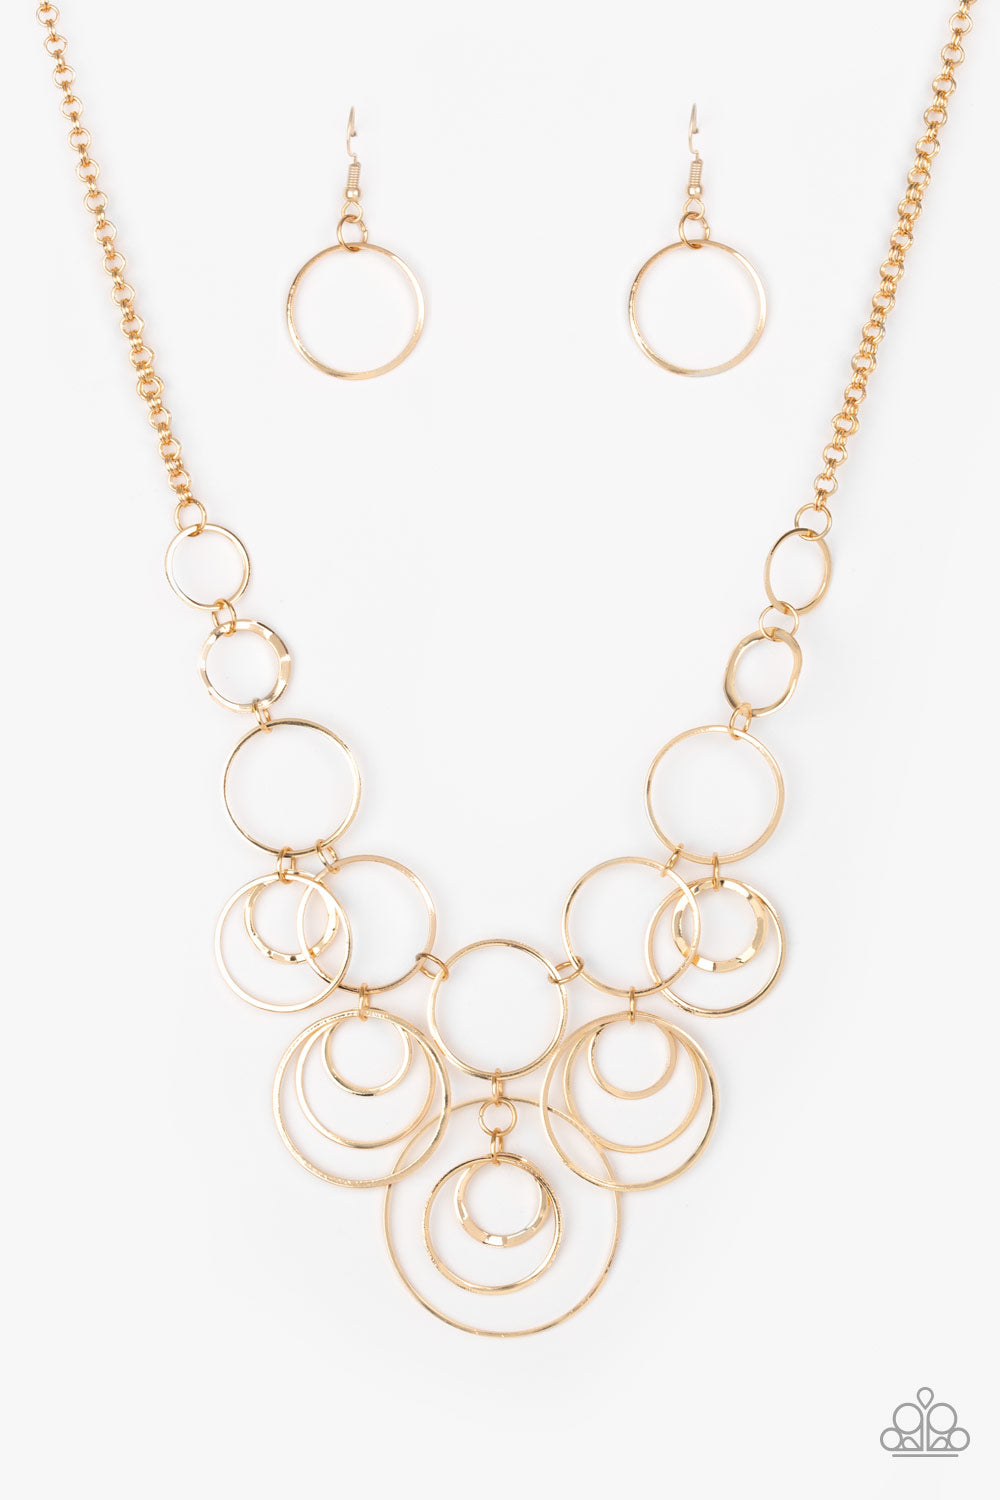 Break The Cycle - Gold necklace 2175